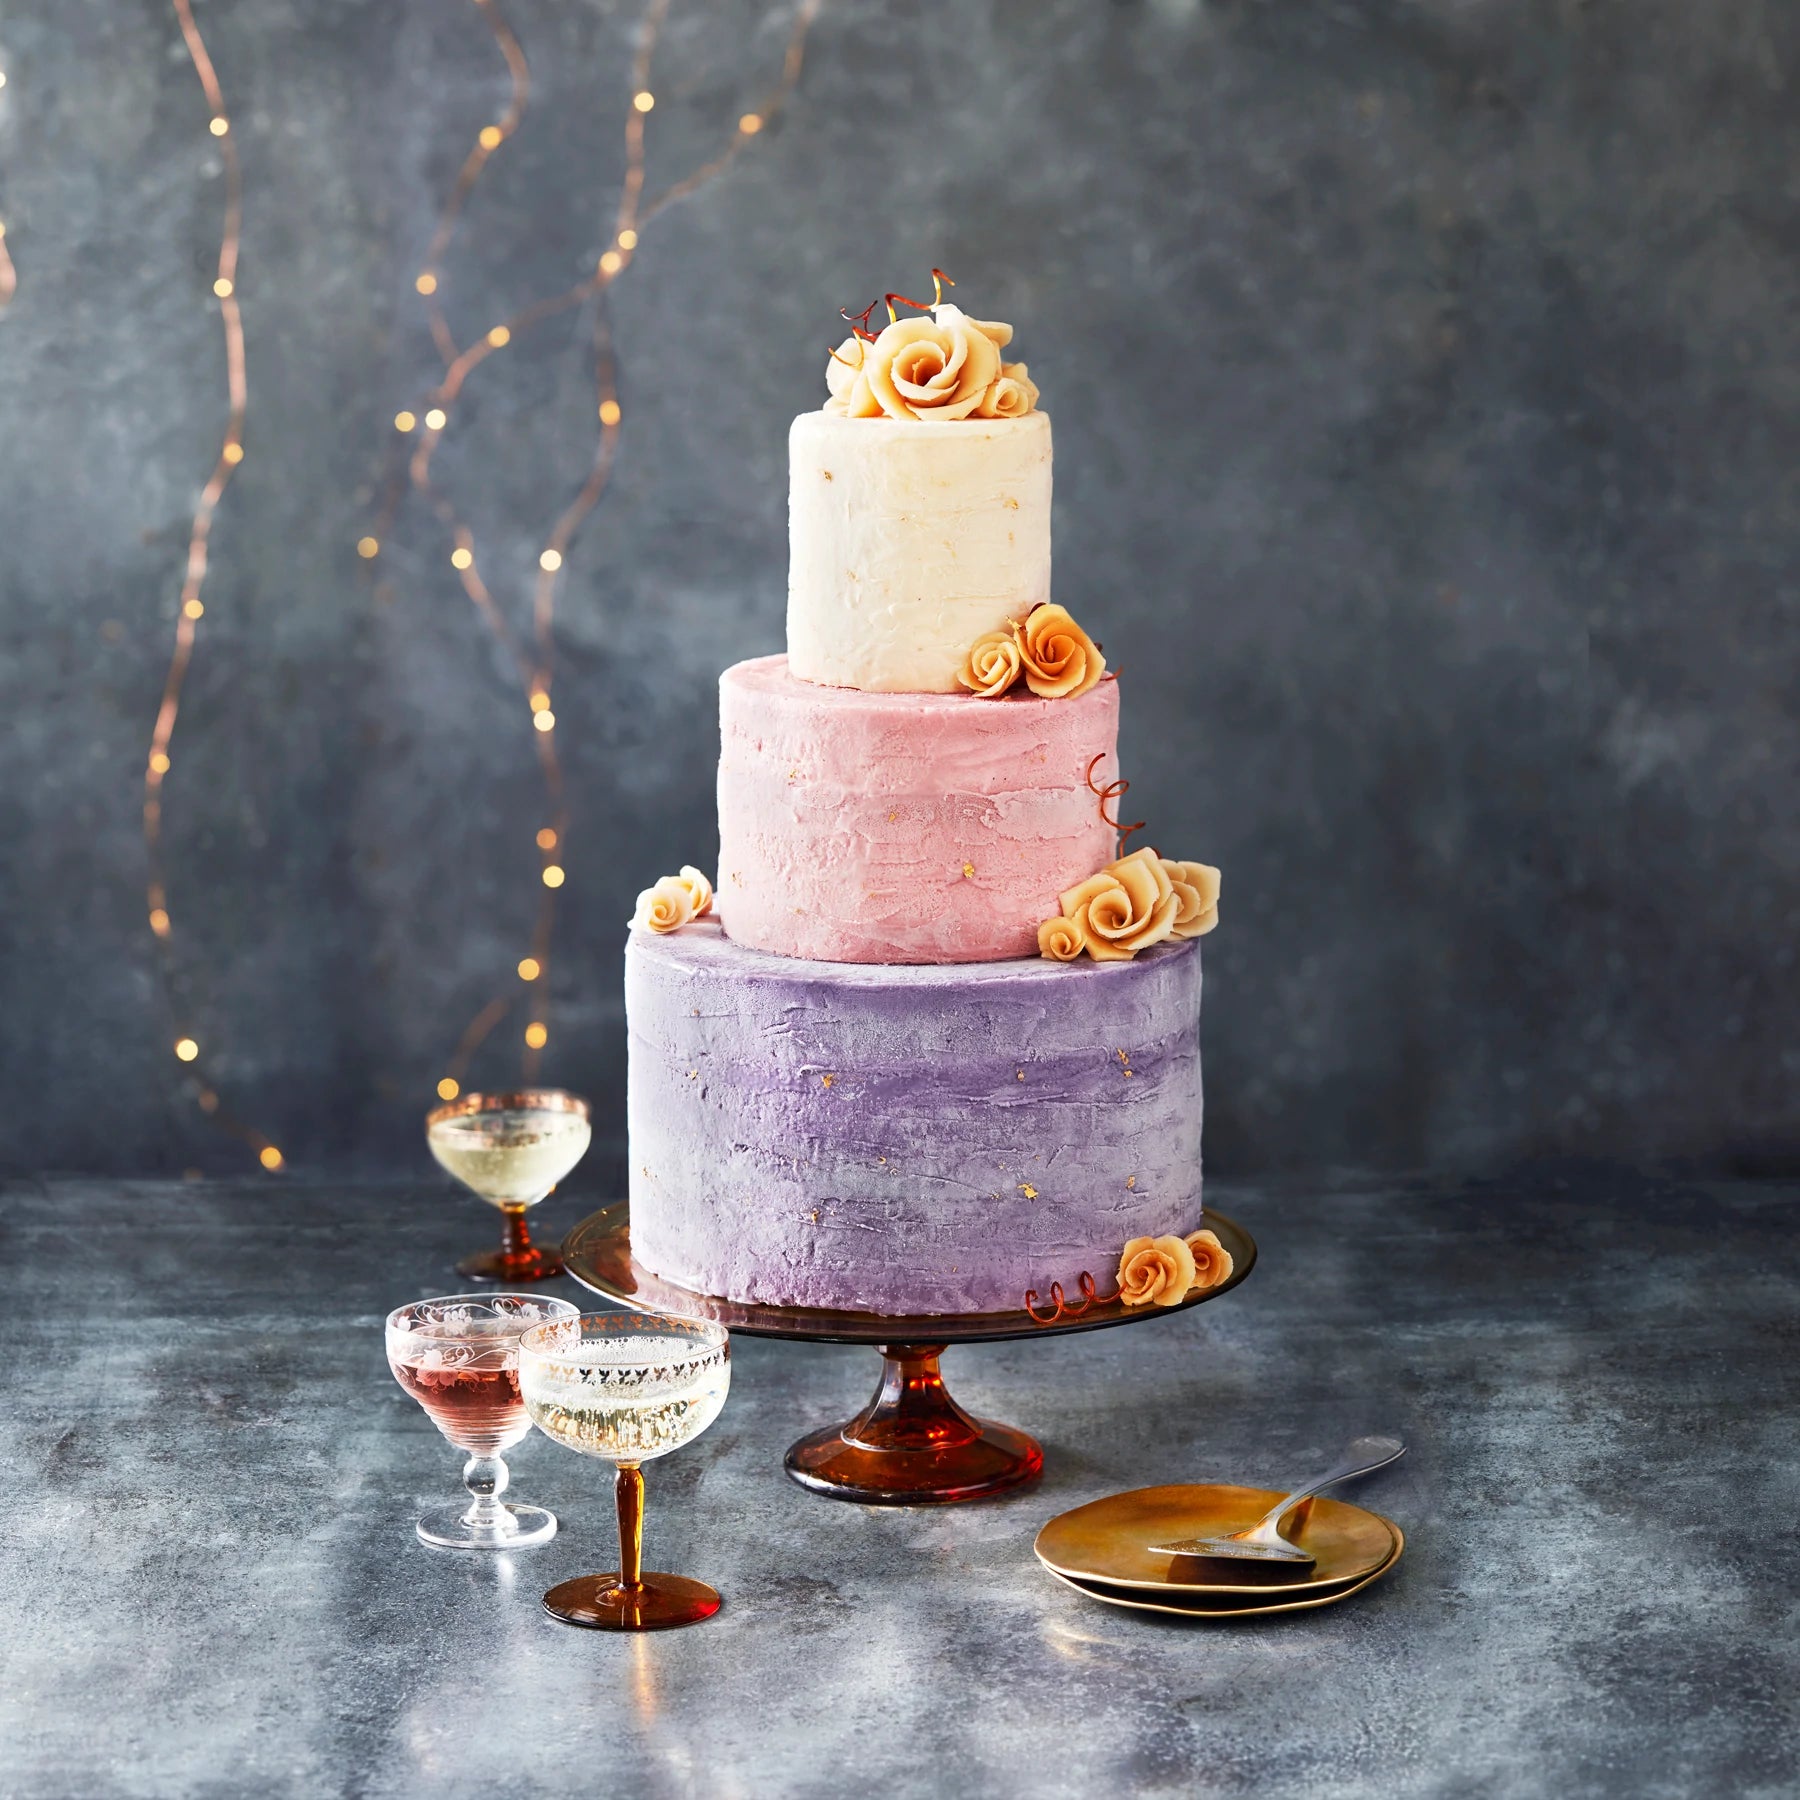 CELEBRATION CAKES - from £100 - Ruby Violet Ice Cream & Sorbet